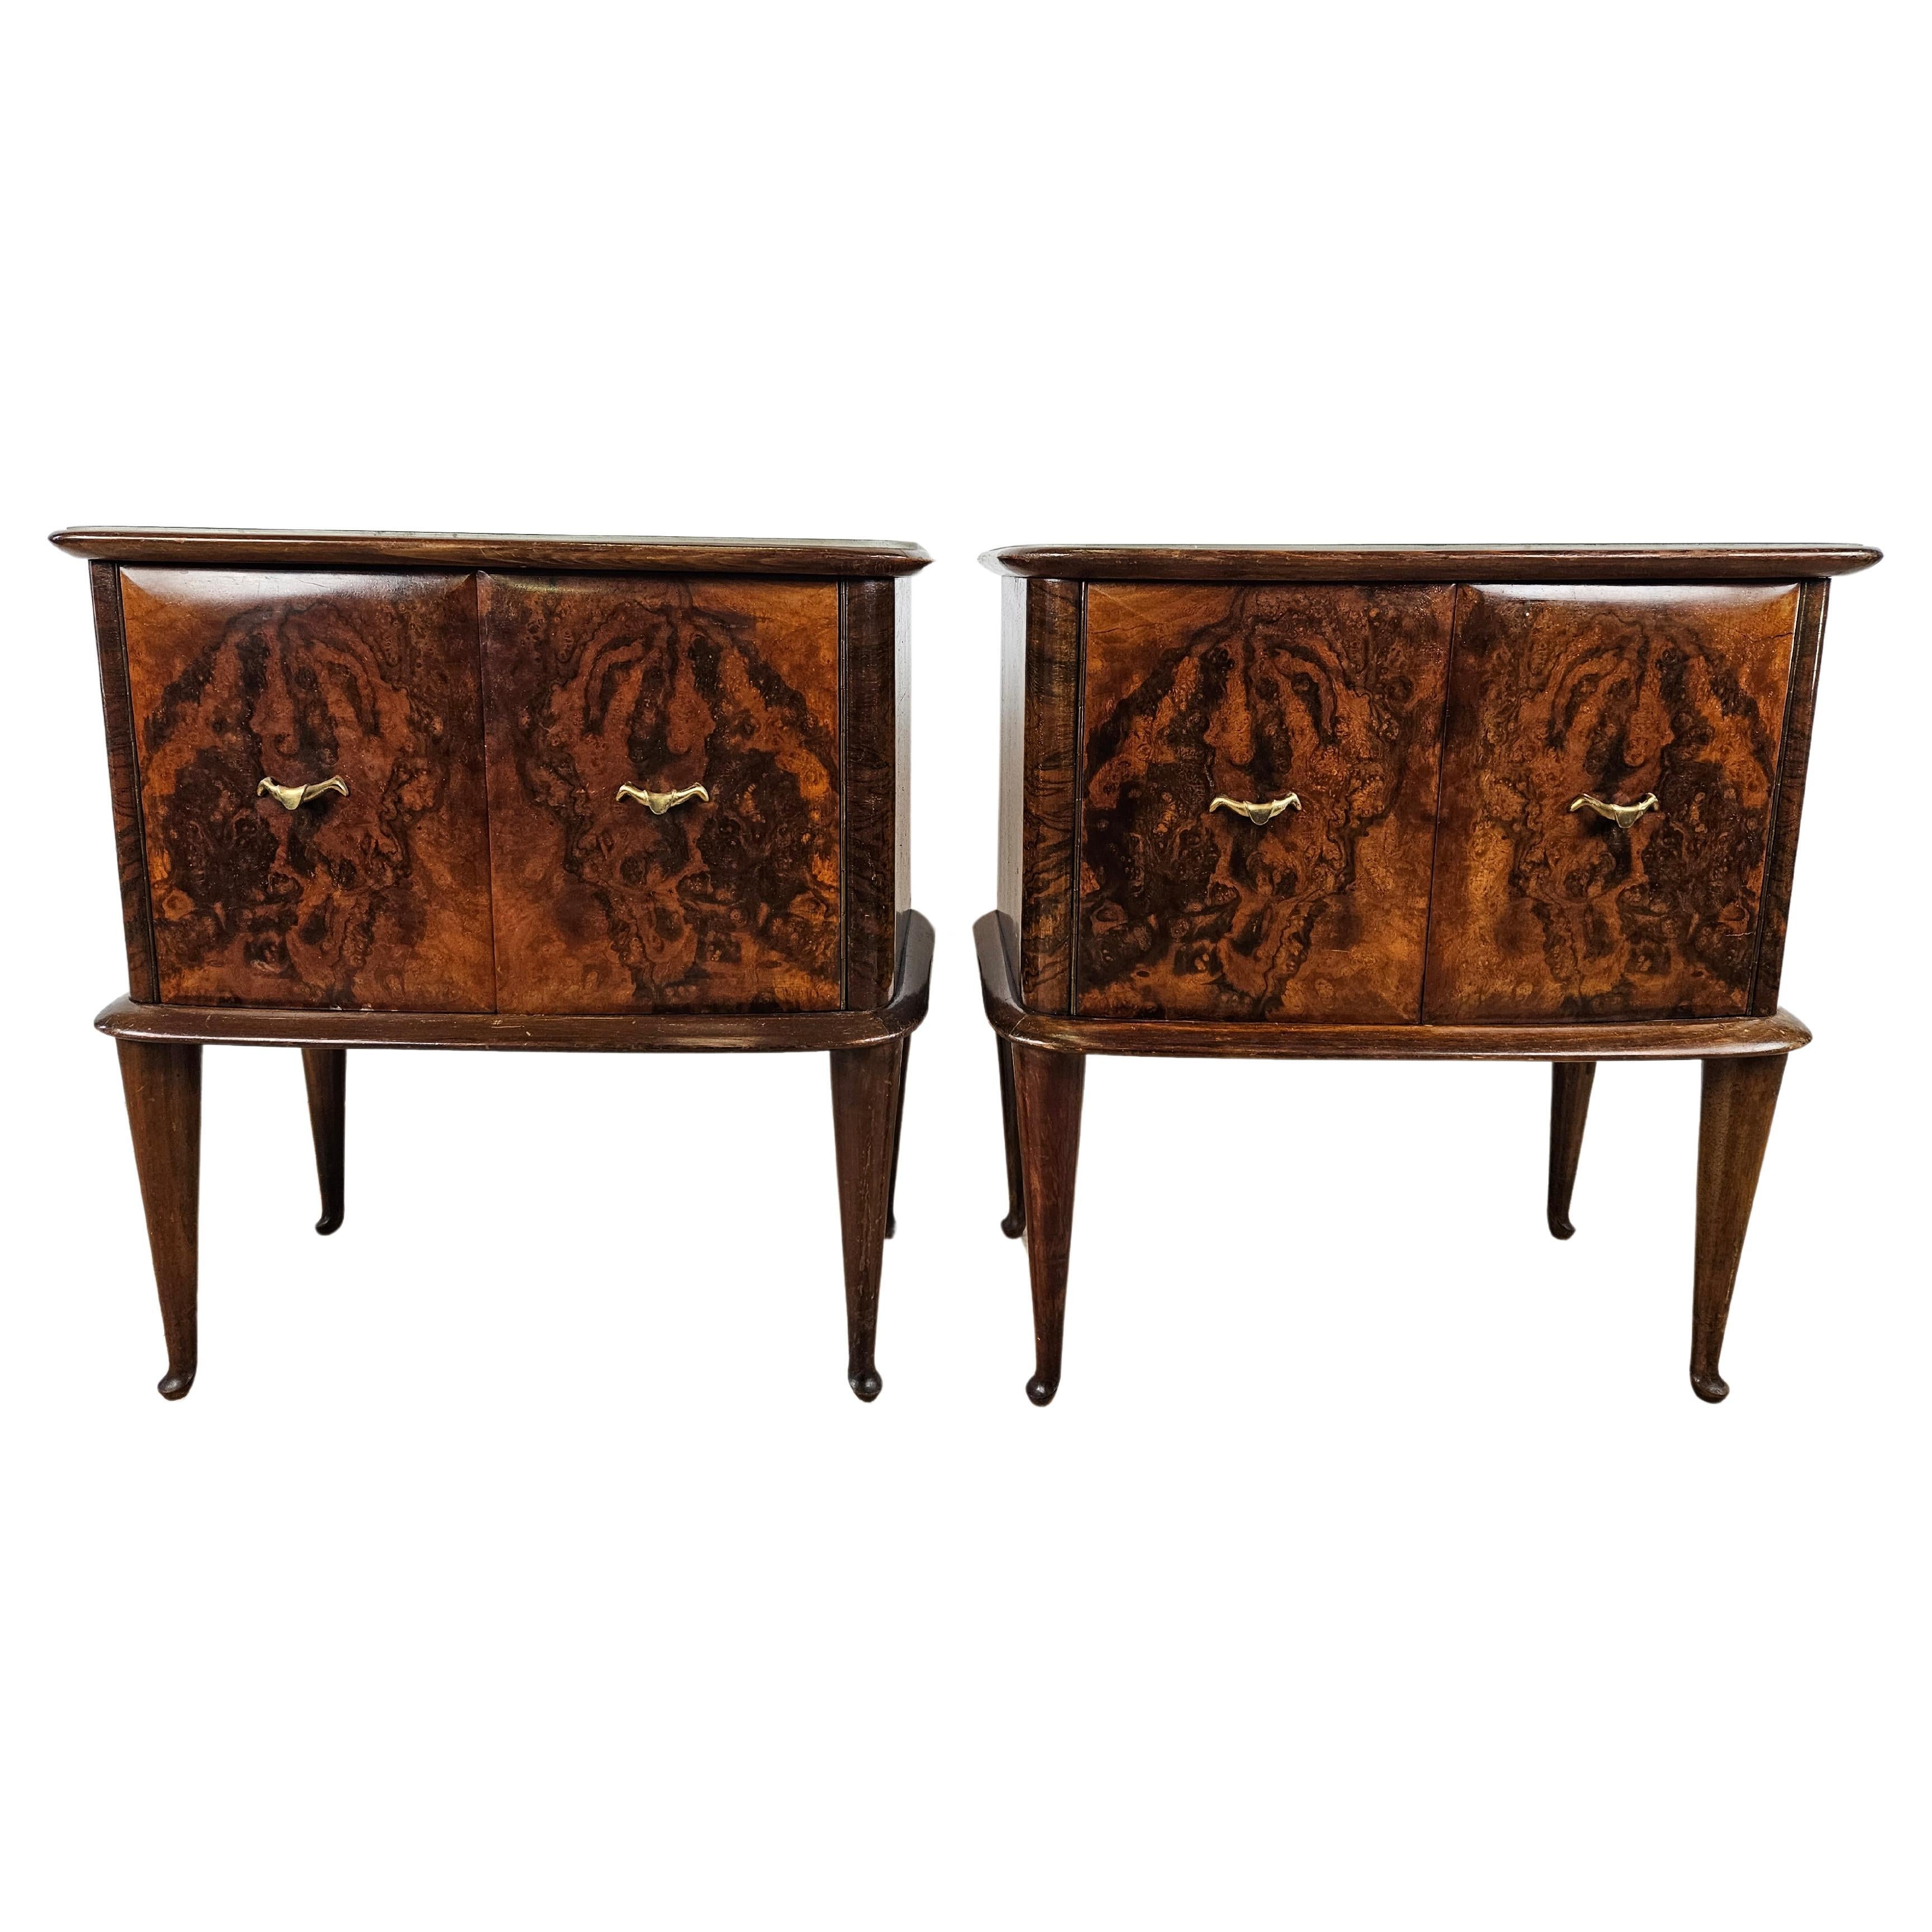 Pair of walnut burl bedside tables with Mid Century glass top